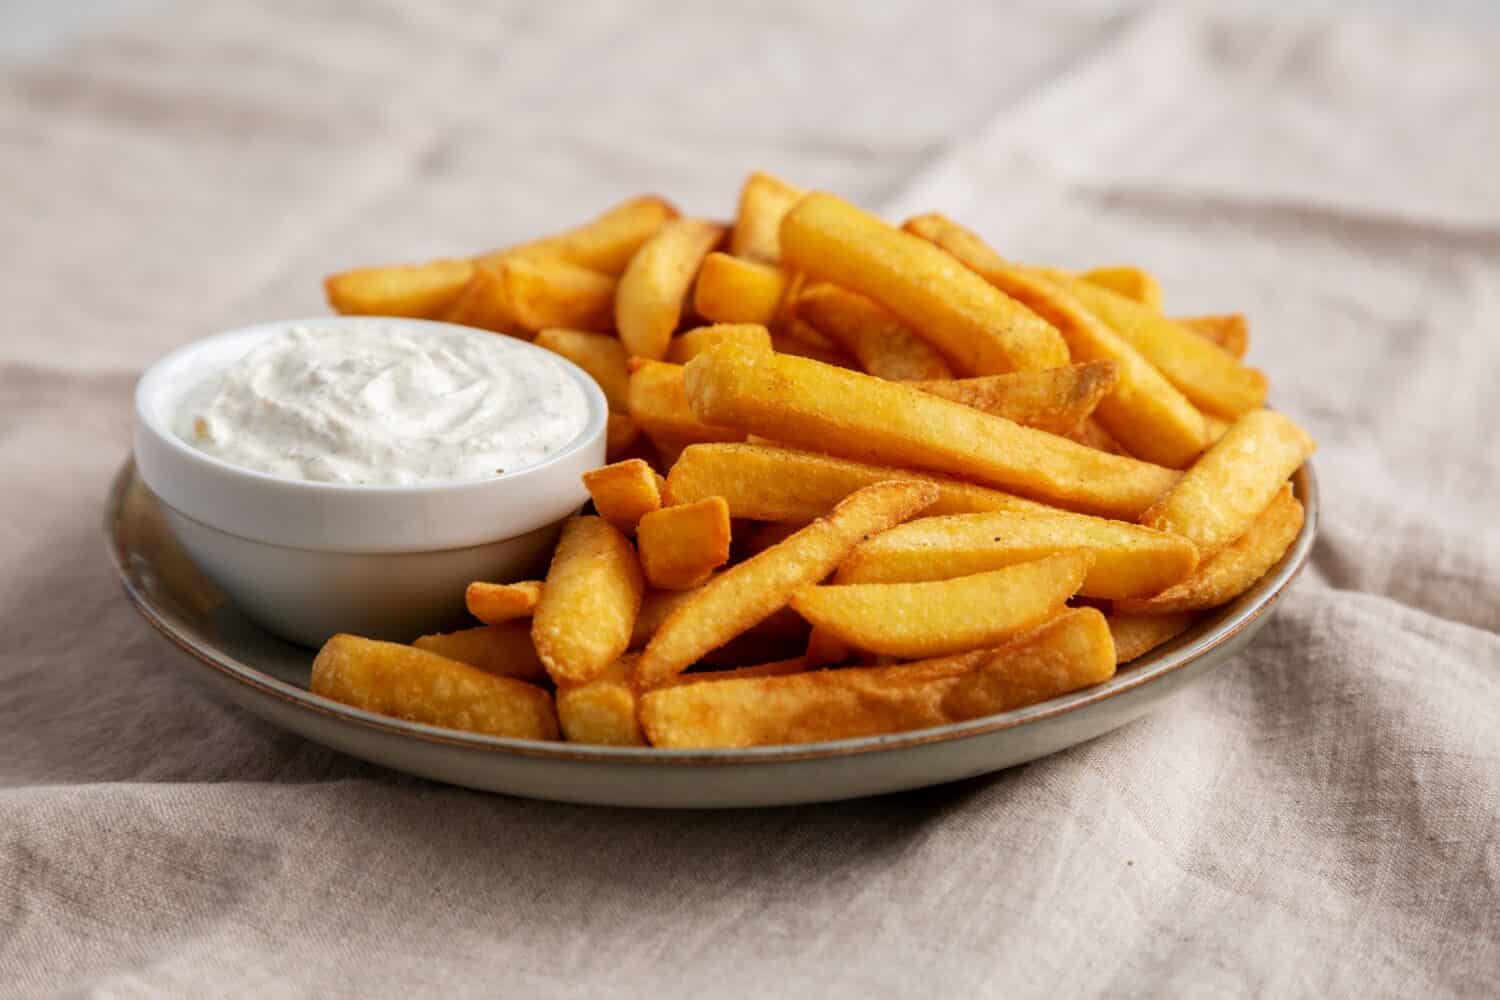 Homemade French Fries with Ranch Dressing on a Plate, side view. Close-up.